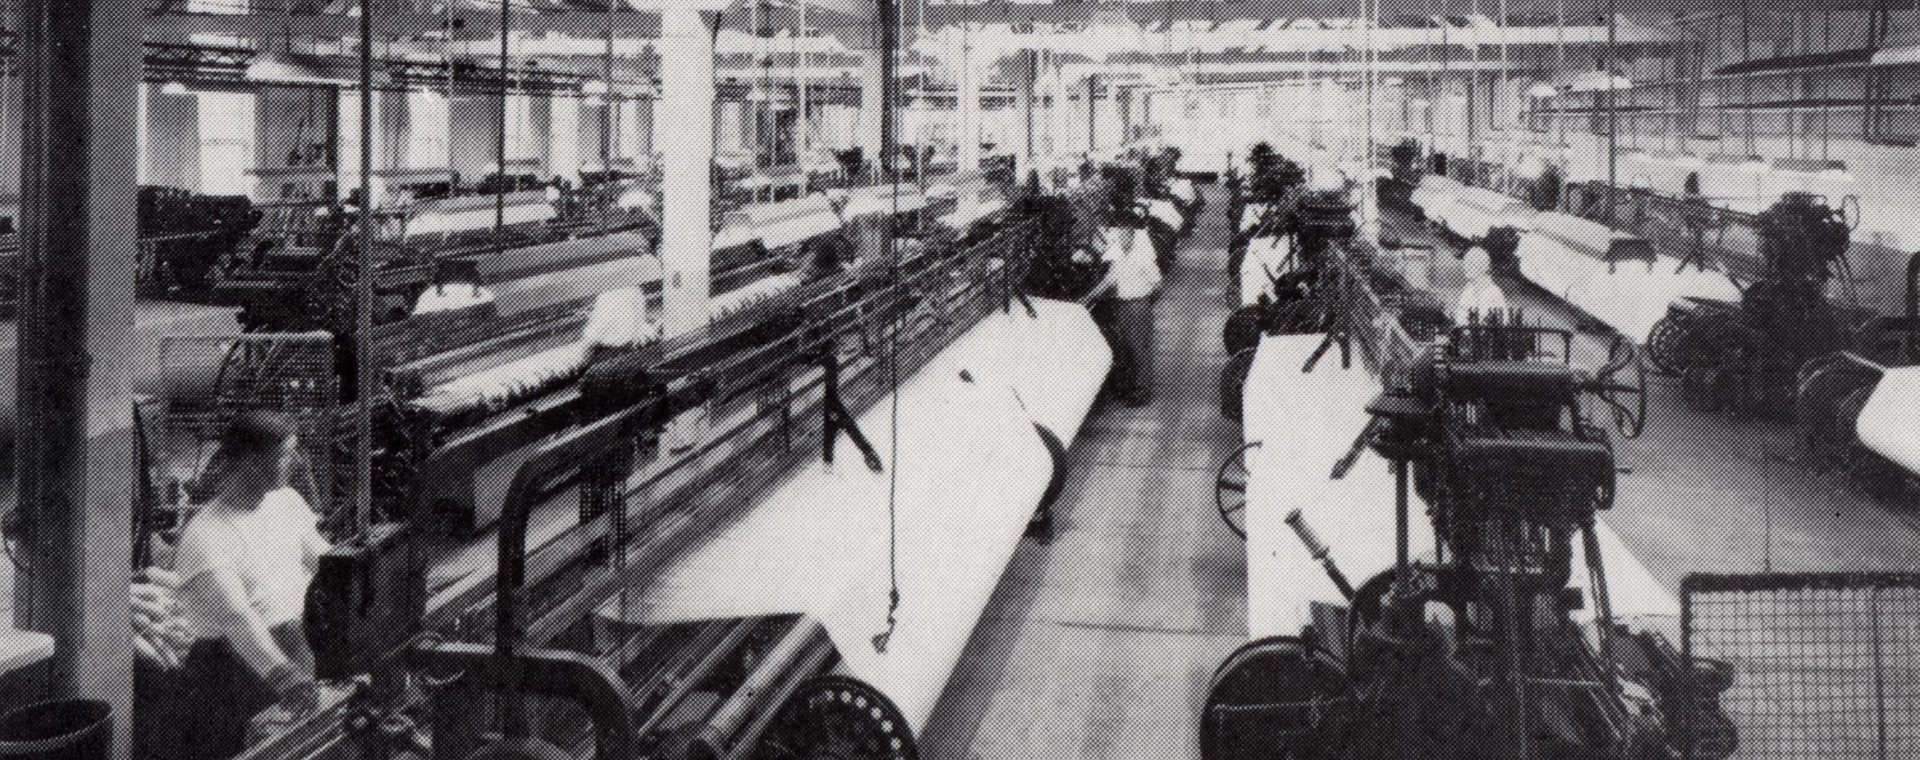 A factory floor with several rows of weaving machines.